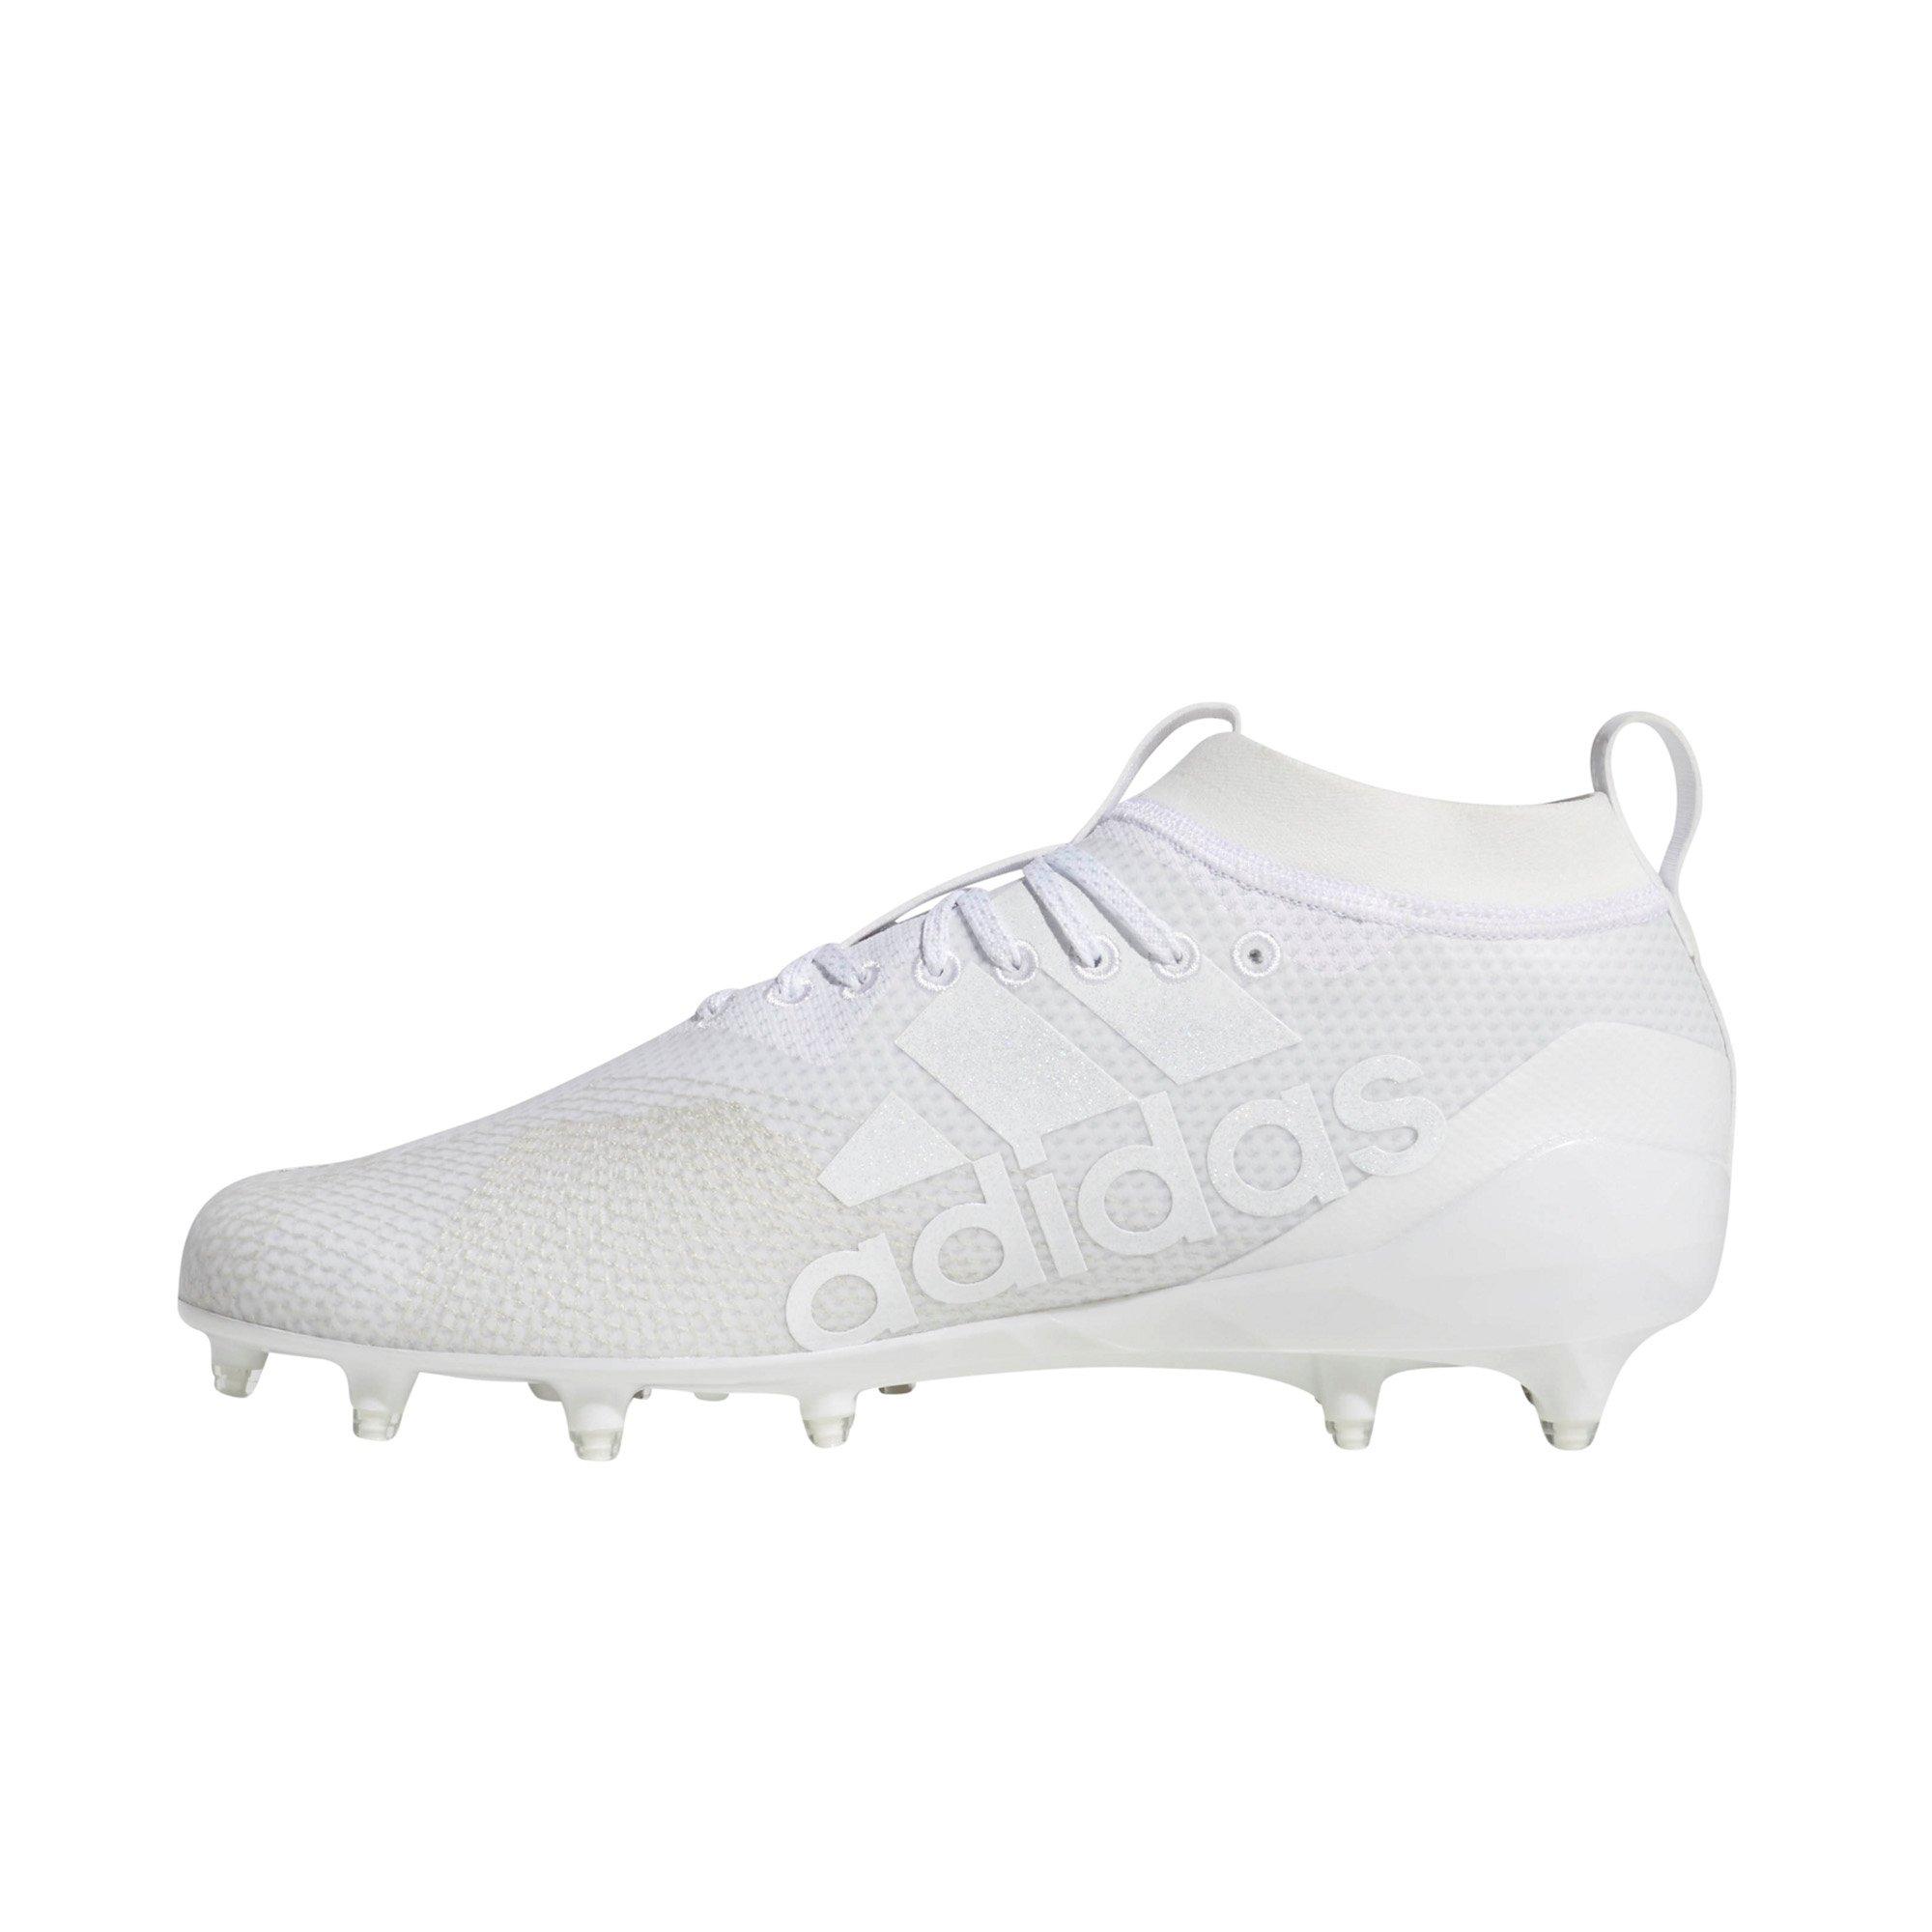 adidas low top football cleats